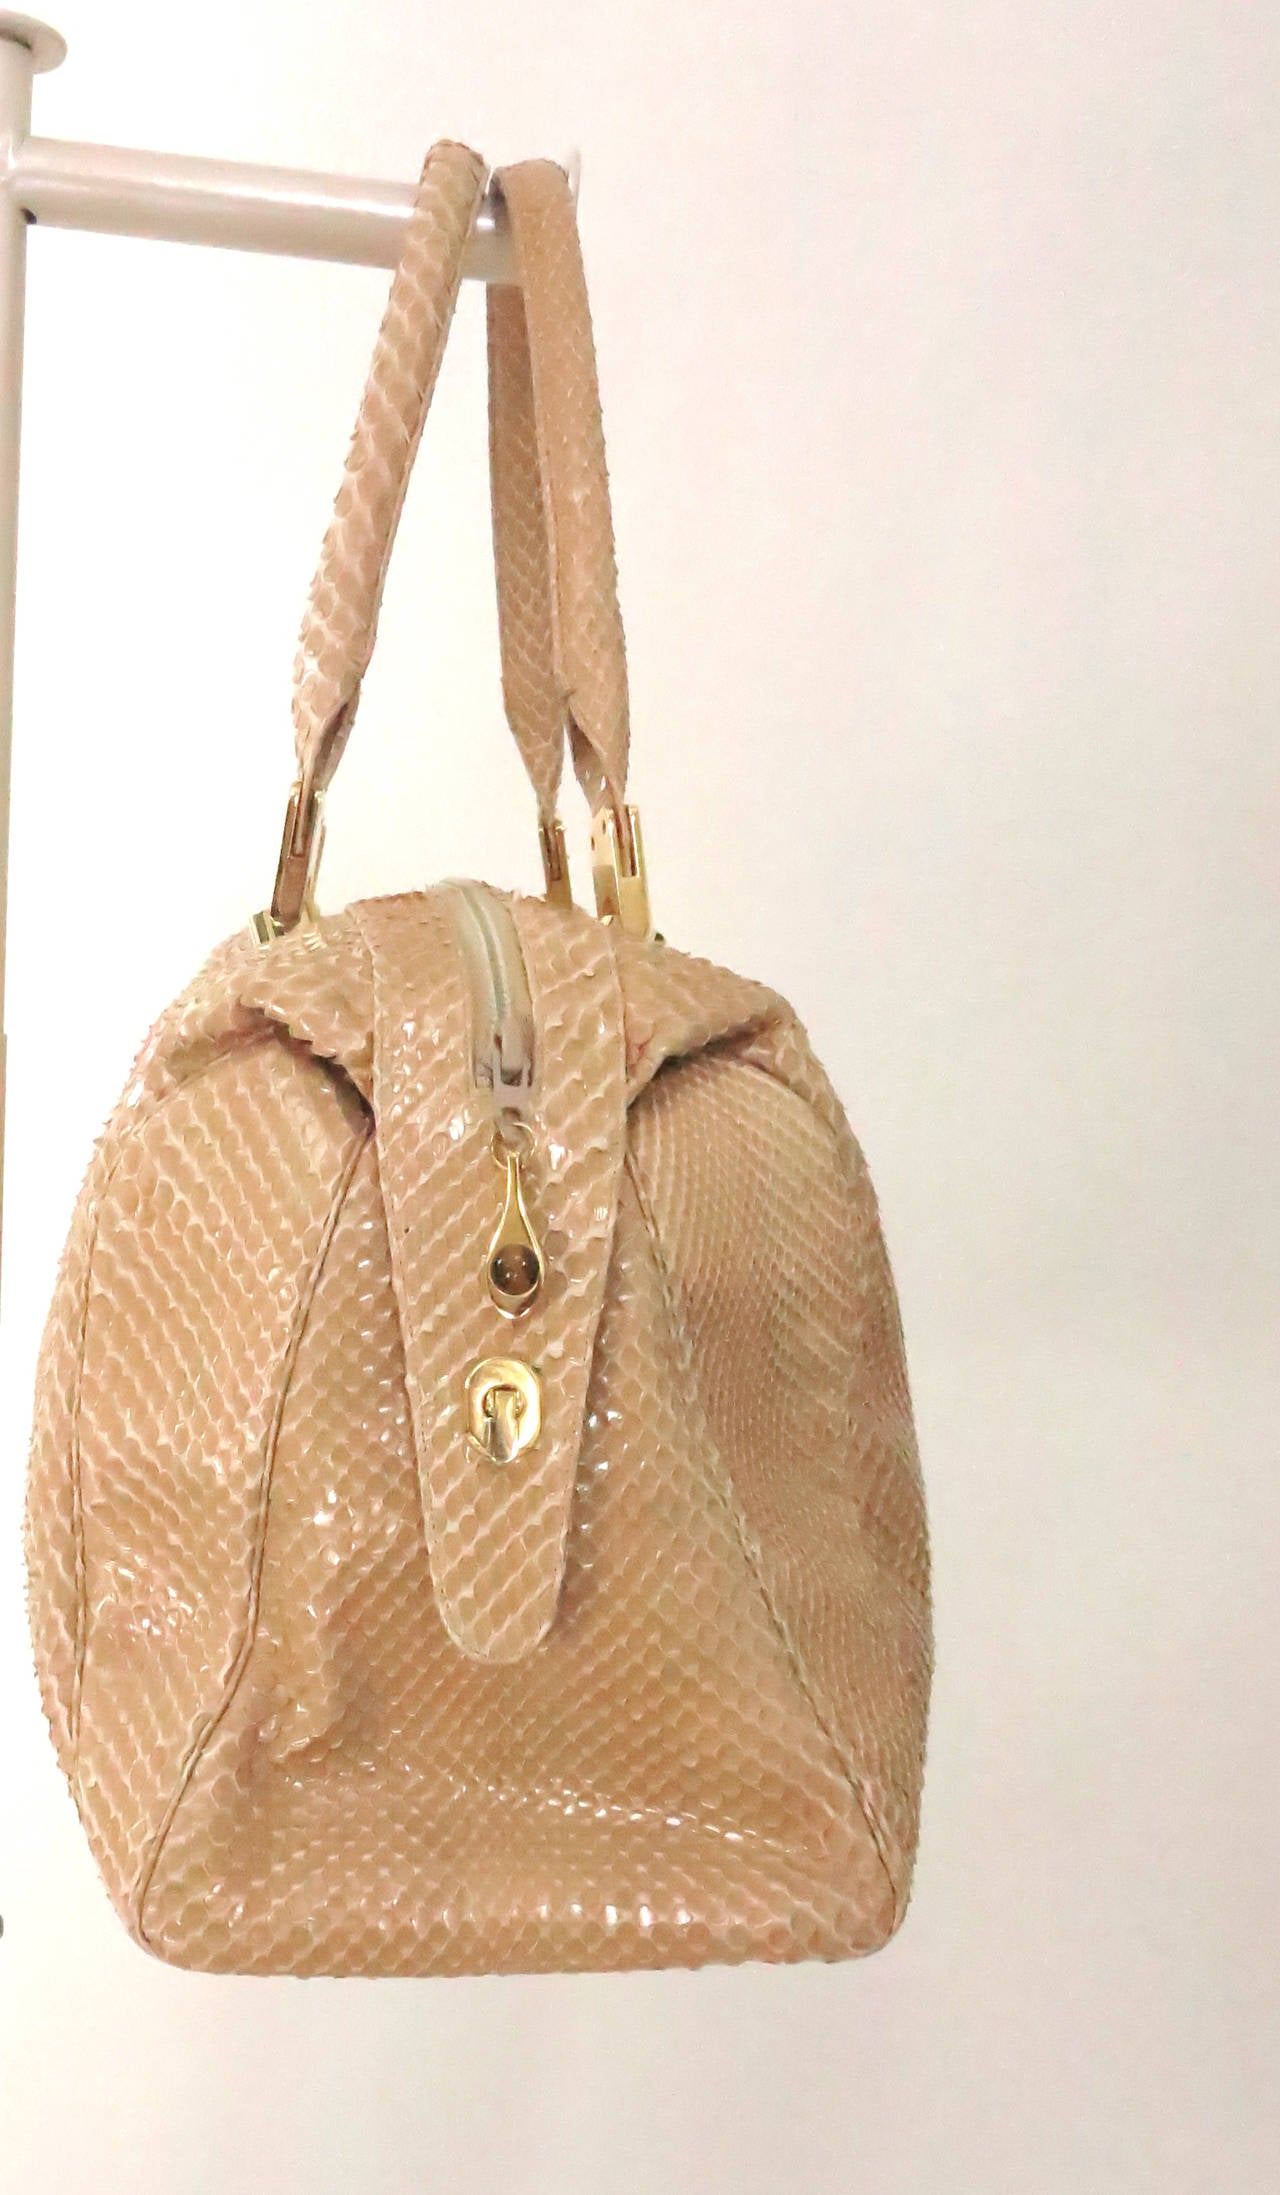 Gorgeous blond snake skin double handle tote bag by Judith Leiber...Large size tote had a top zipper entry that latches closed at each end for a sleek look...Gold hardware, zipper pull is set with a tiger's eye stone, gold feet at the bottom...Lined